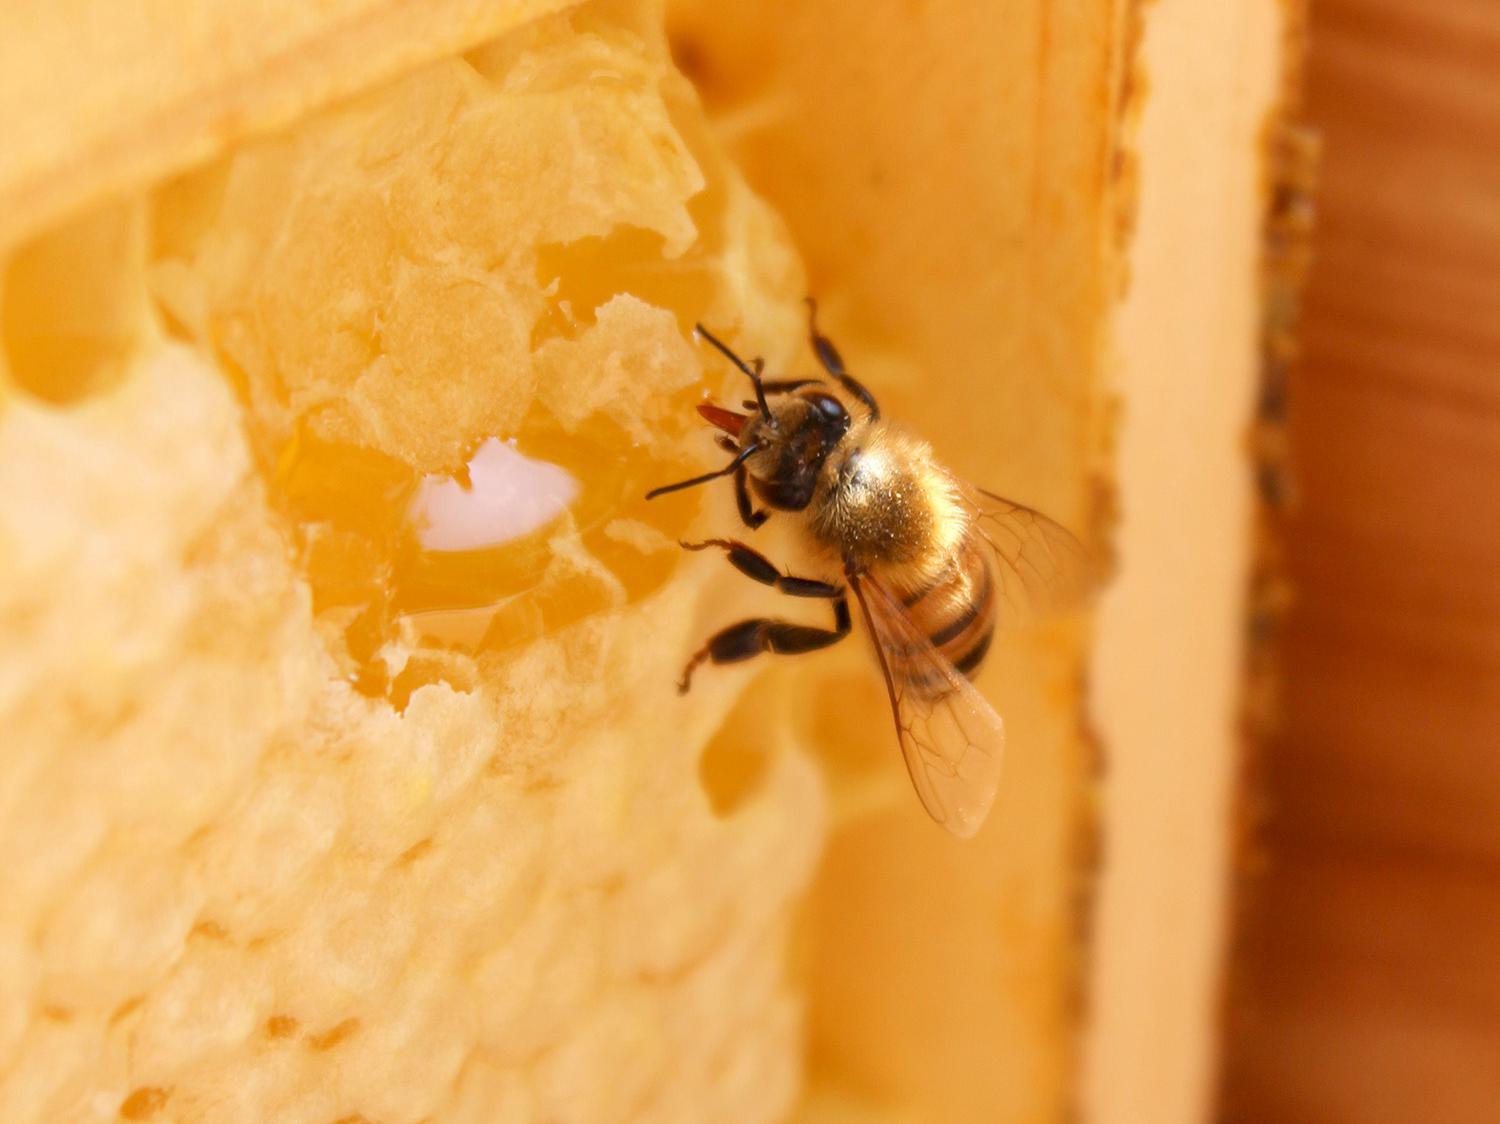 Busy as a bee: A look inside a honey bee hive | Mississippi State